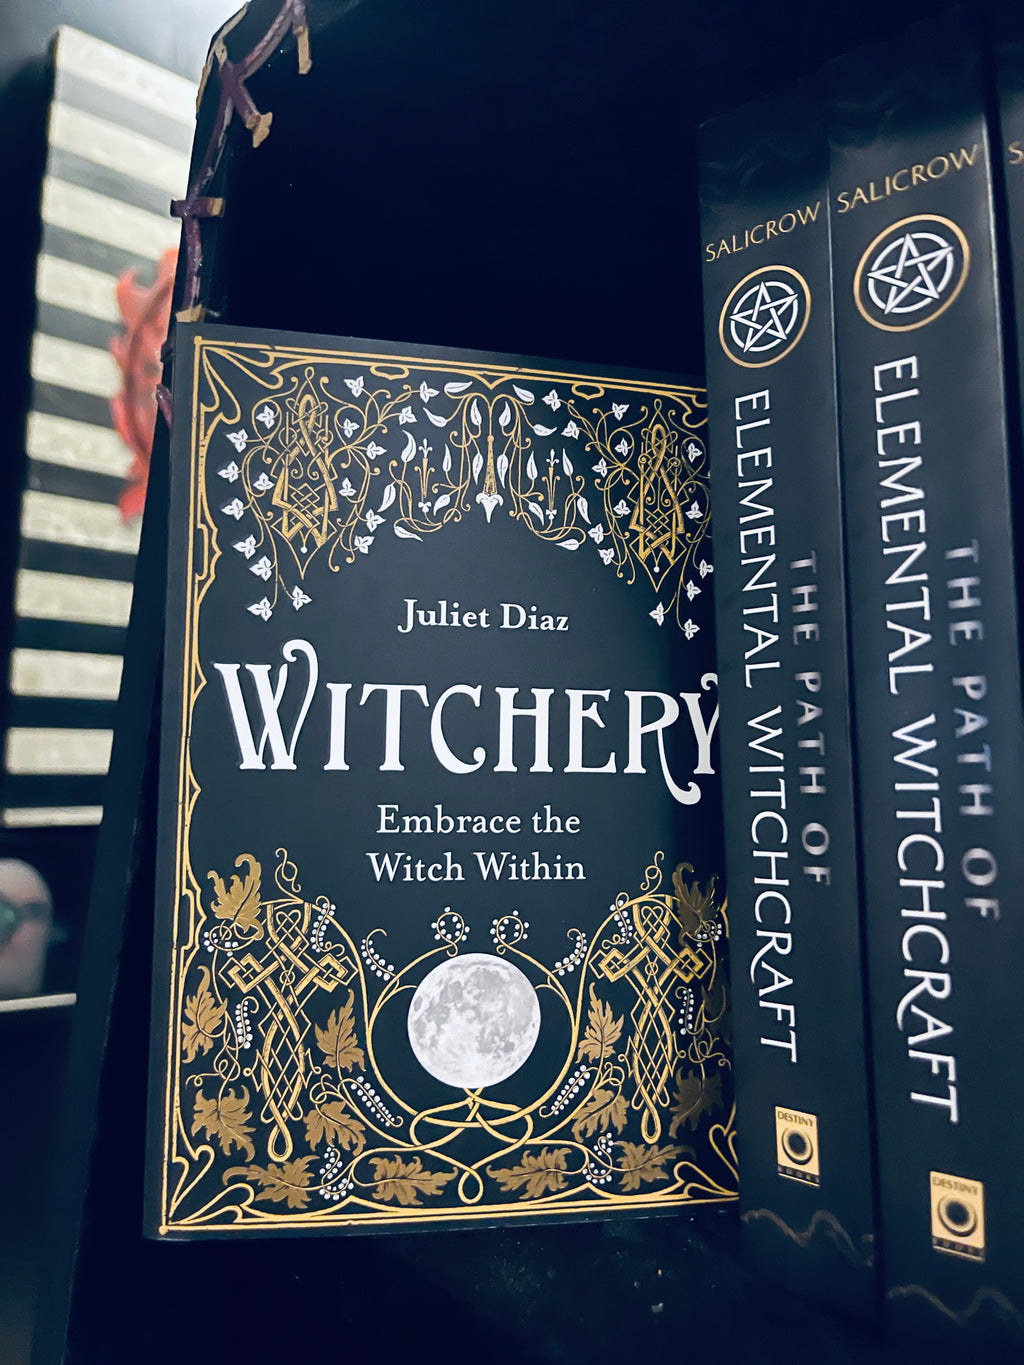 WITCHERY book- embrace the witch within